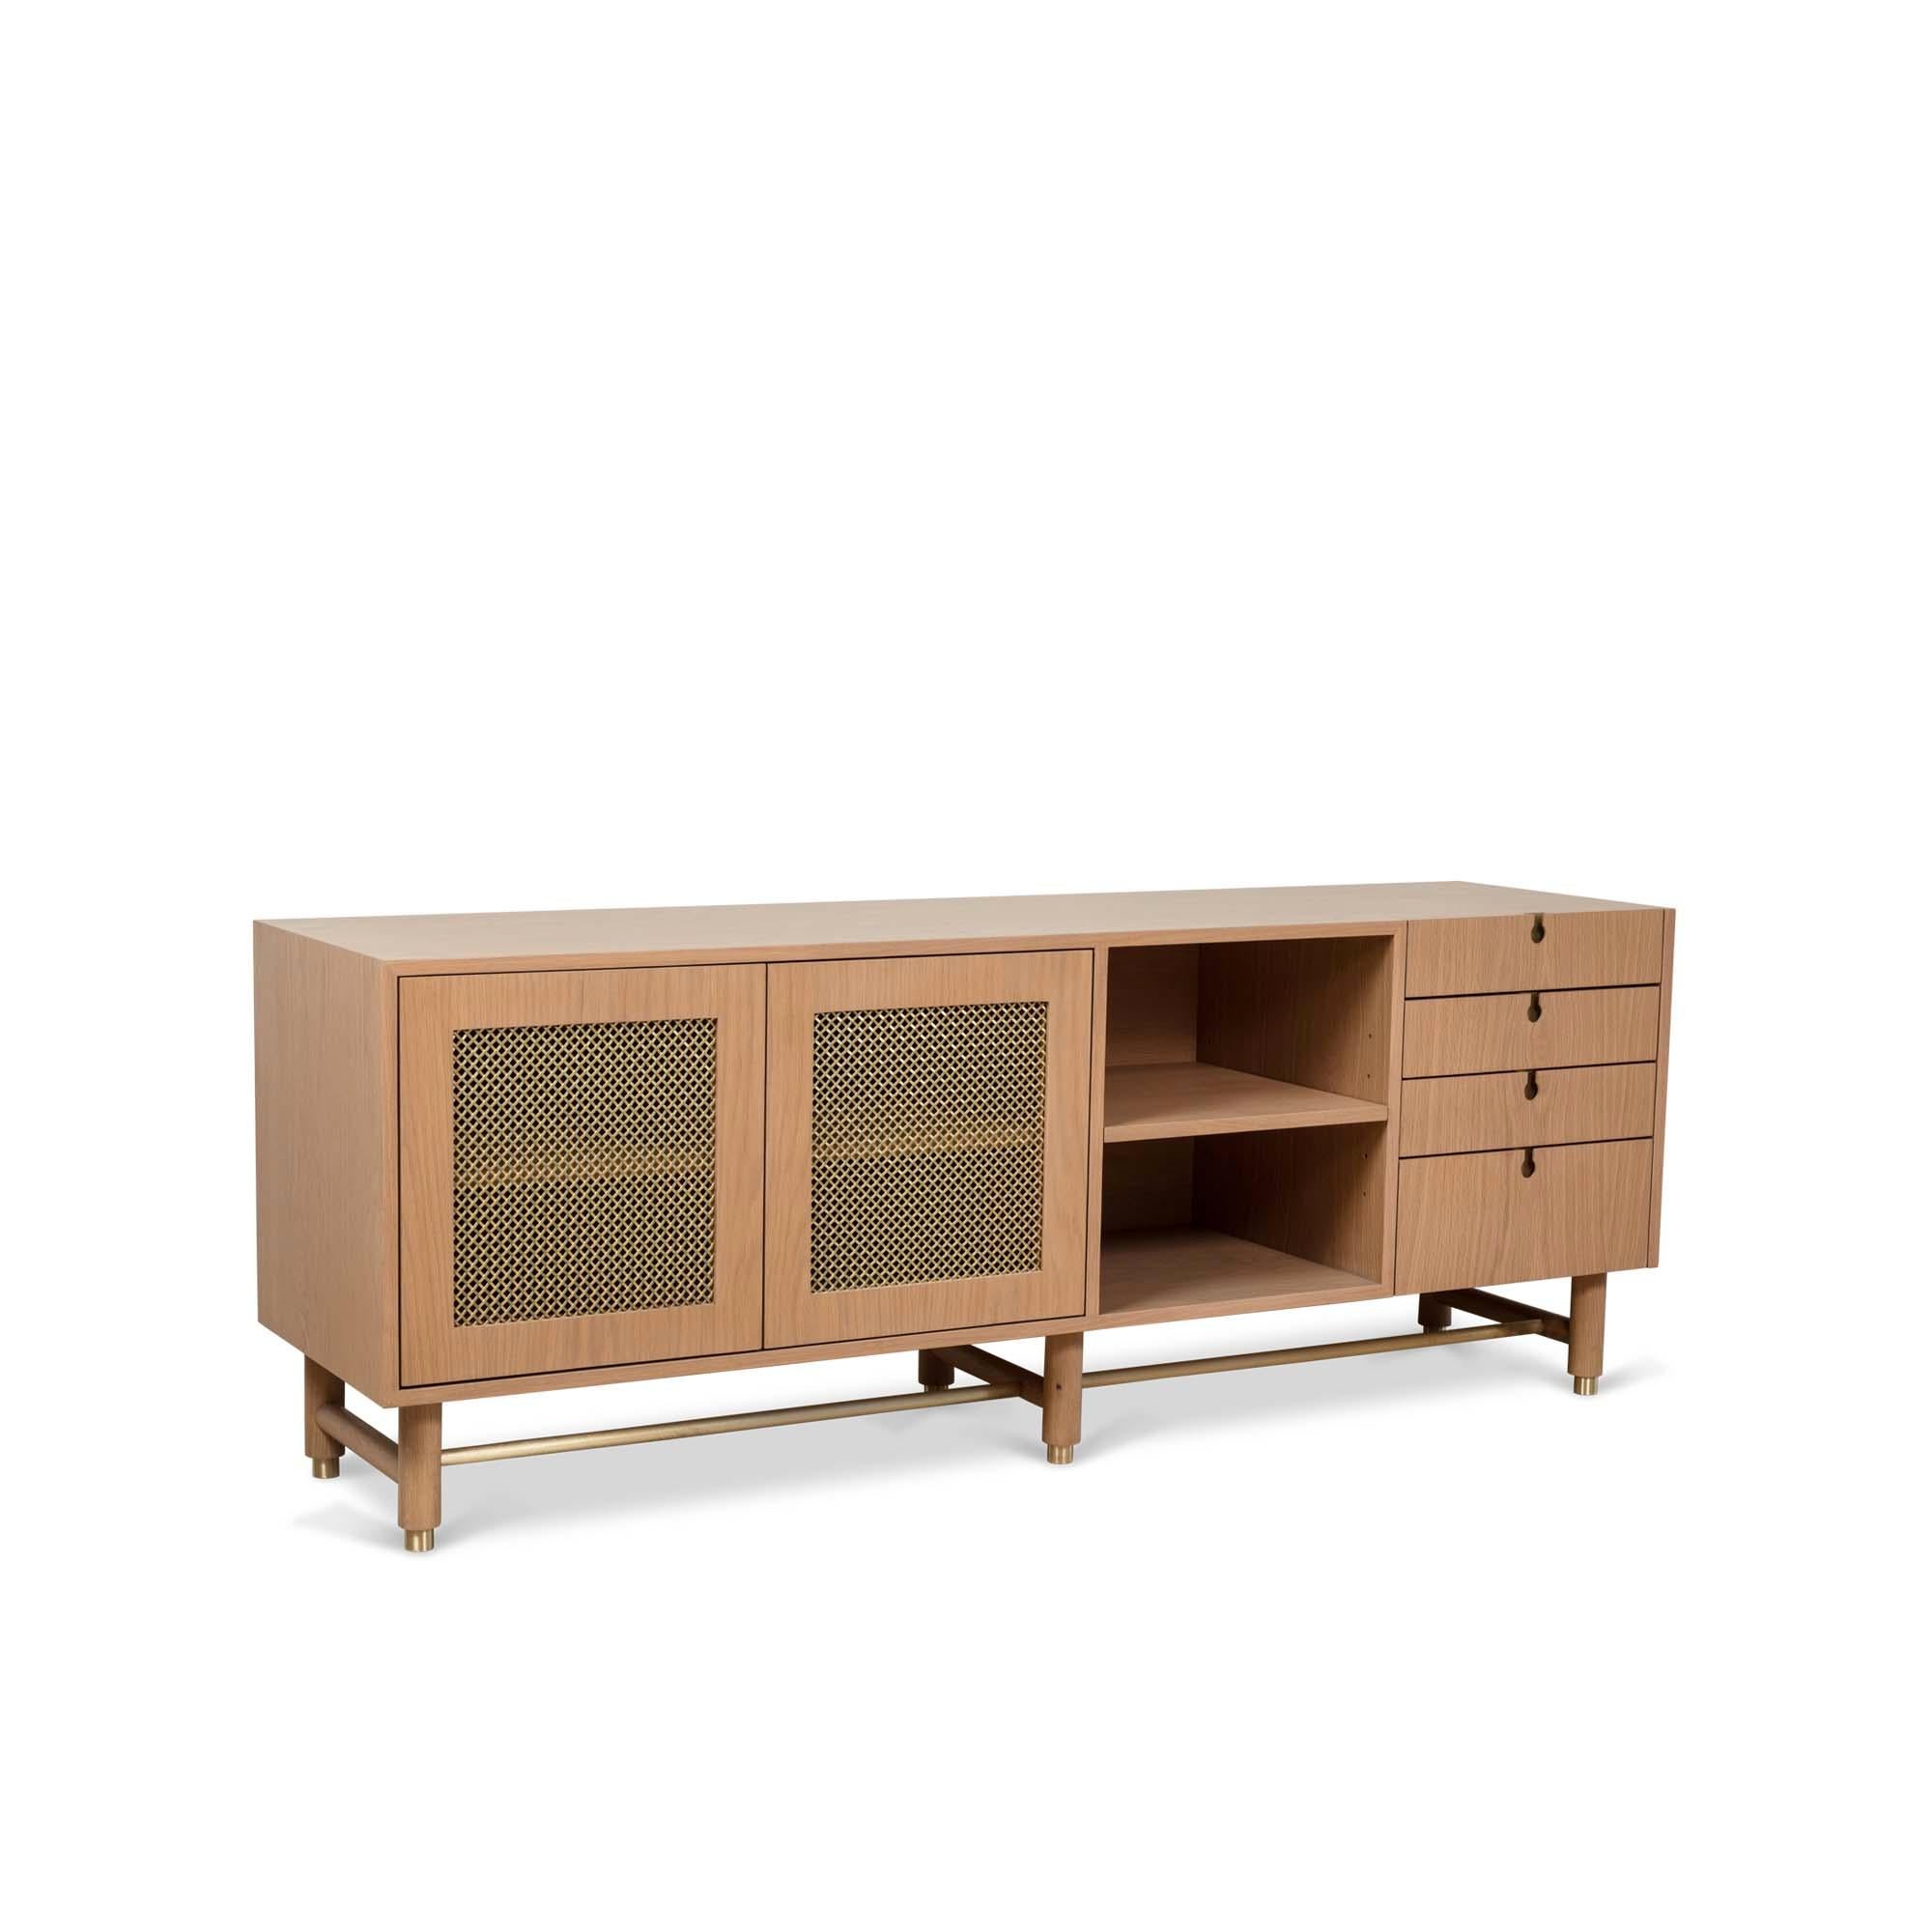 The Niguel Credenza features brass cap feet, a brass cross-stretcher bar and brass inlaid details with brass mesh sliding bypass doors. 

The Lawson-Fenning Collection is designed and handmade in Los Angeles, California. Reach out to discover what